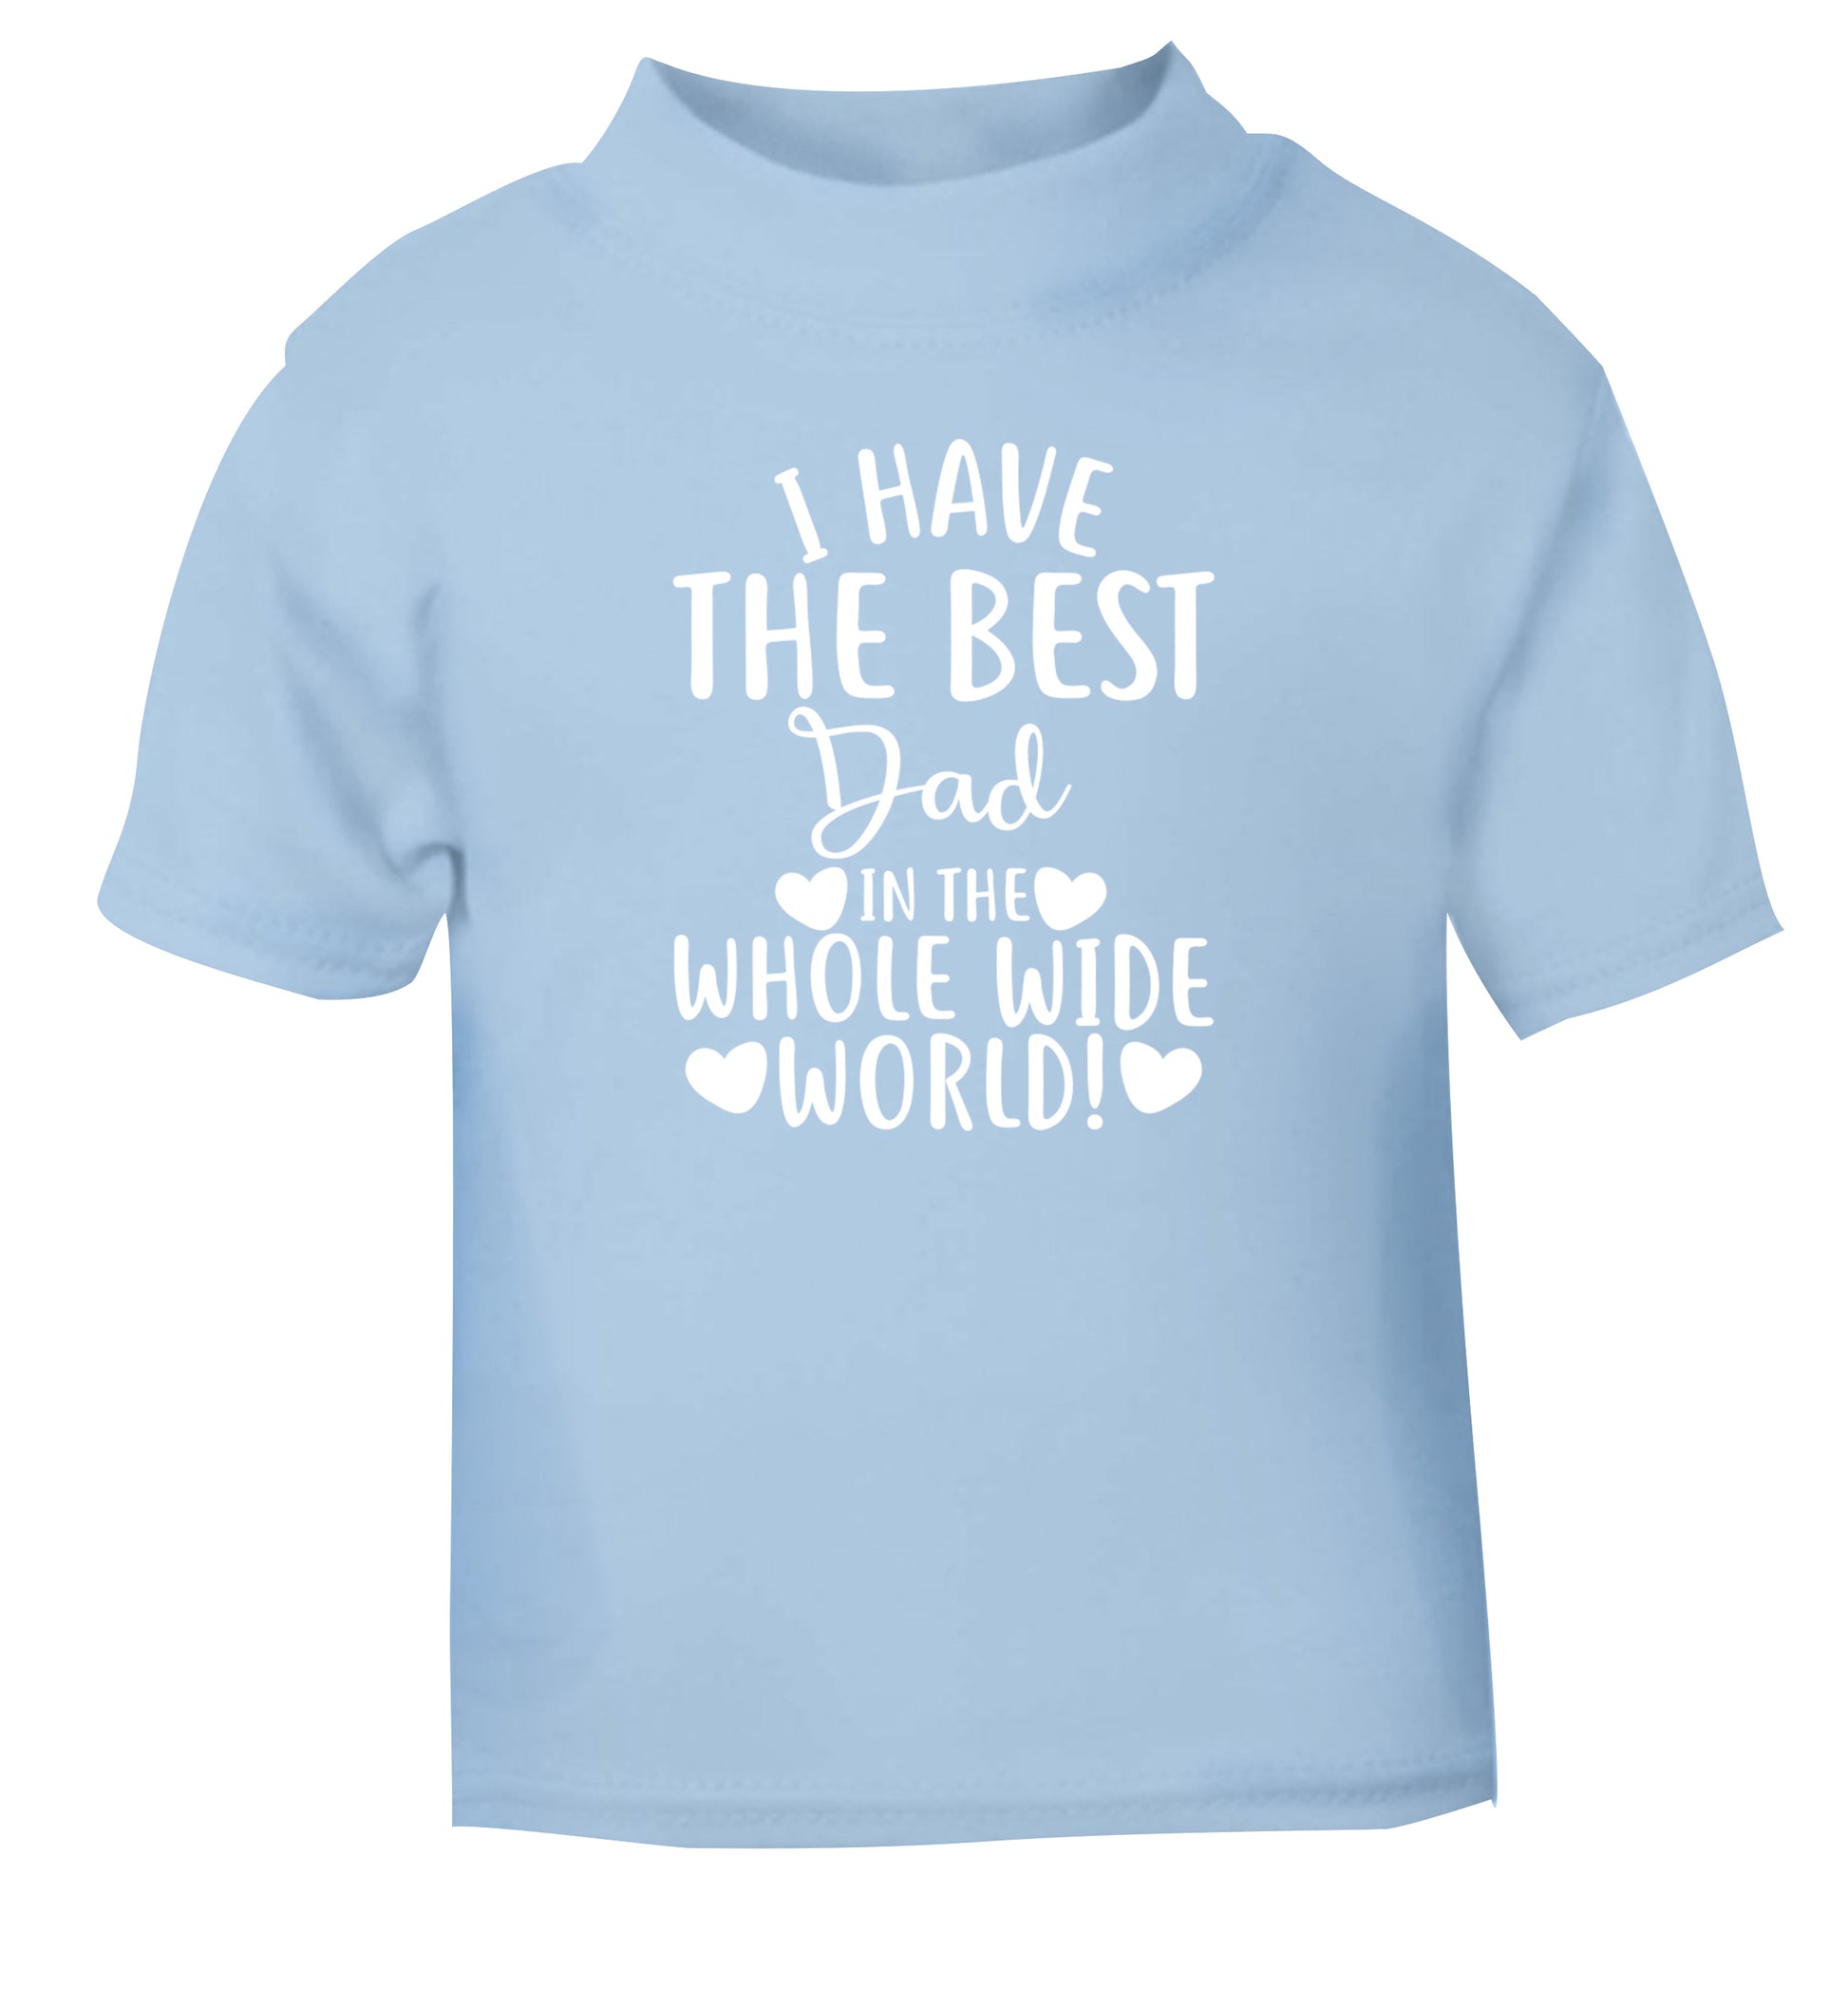 I have the best dad in the whole wide world! light blue Baby Toddler Tshirt 2 Years